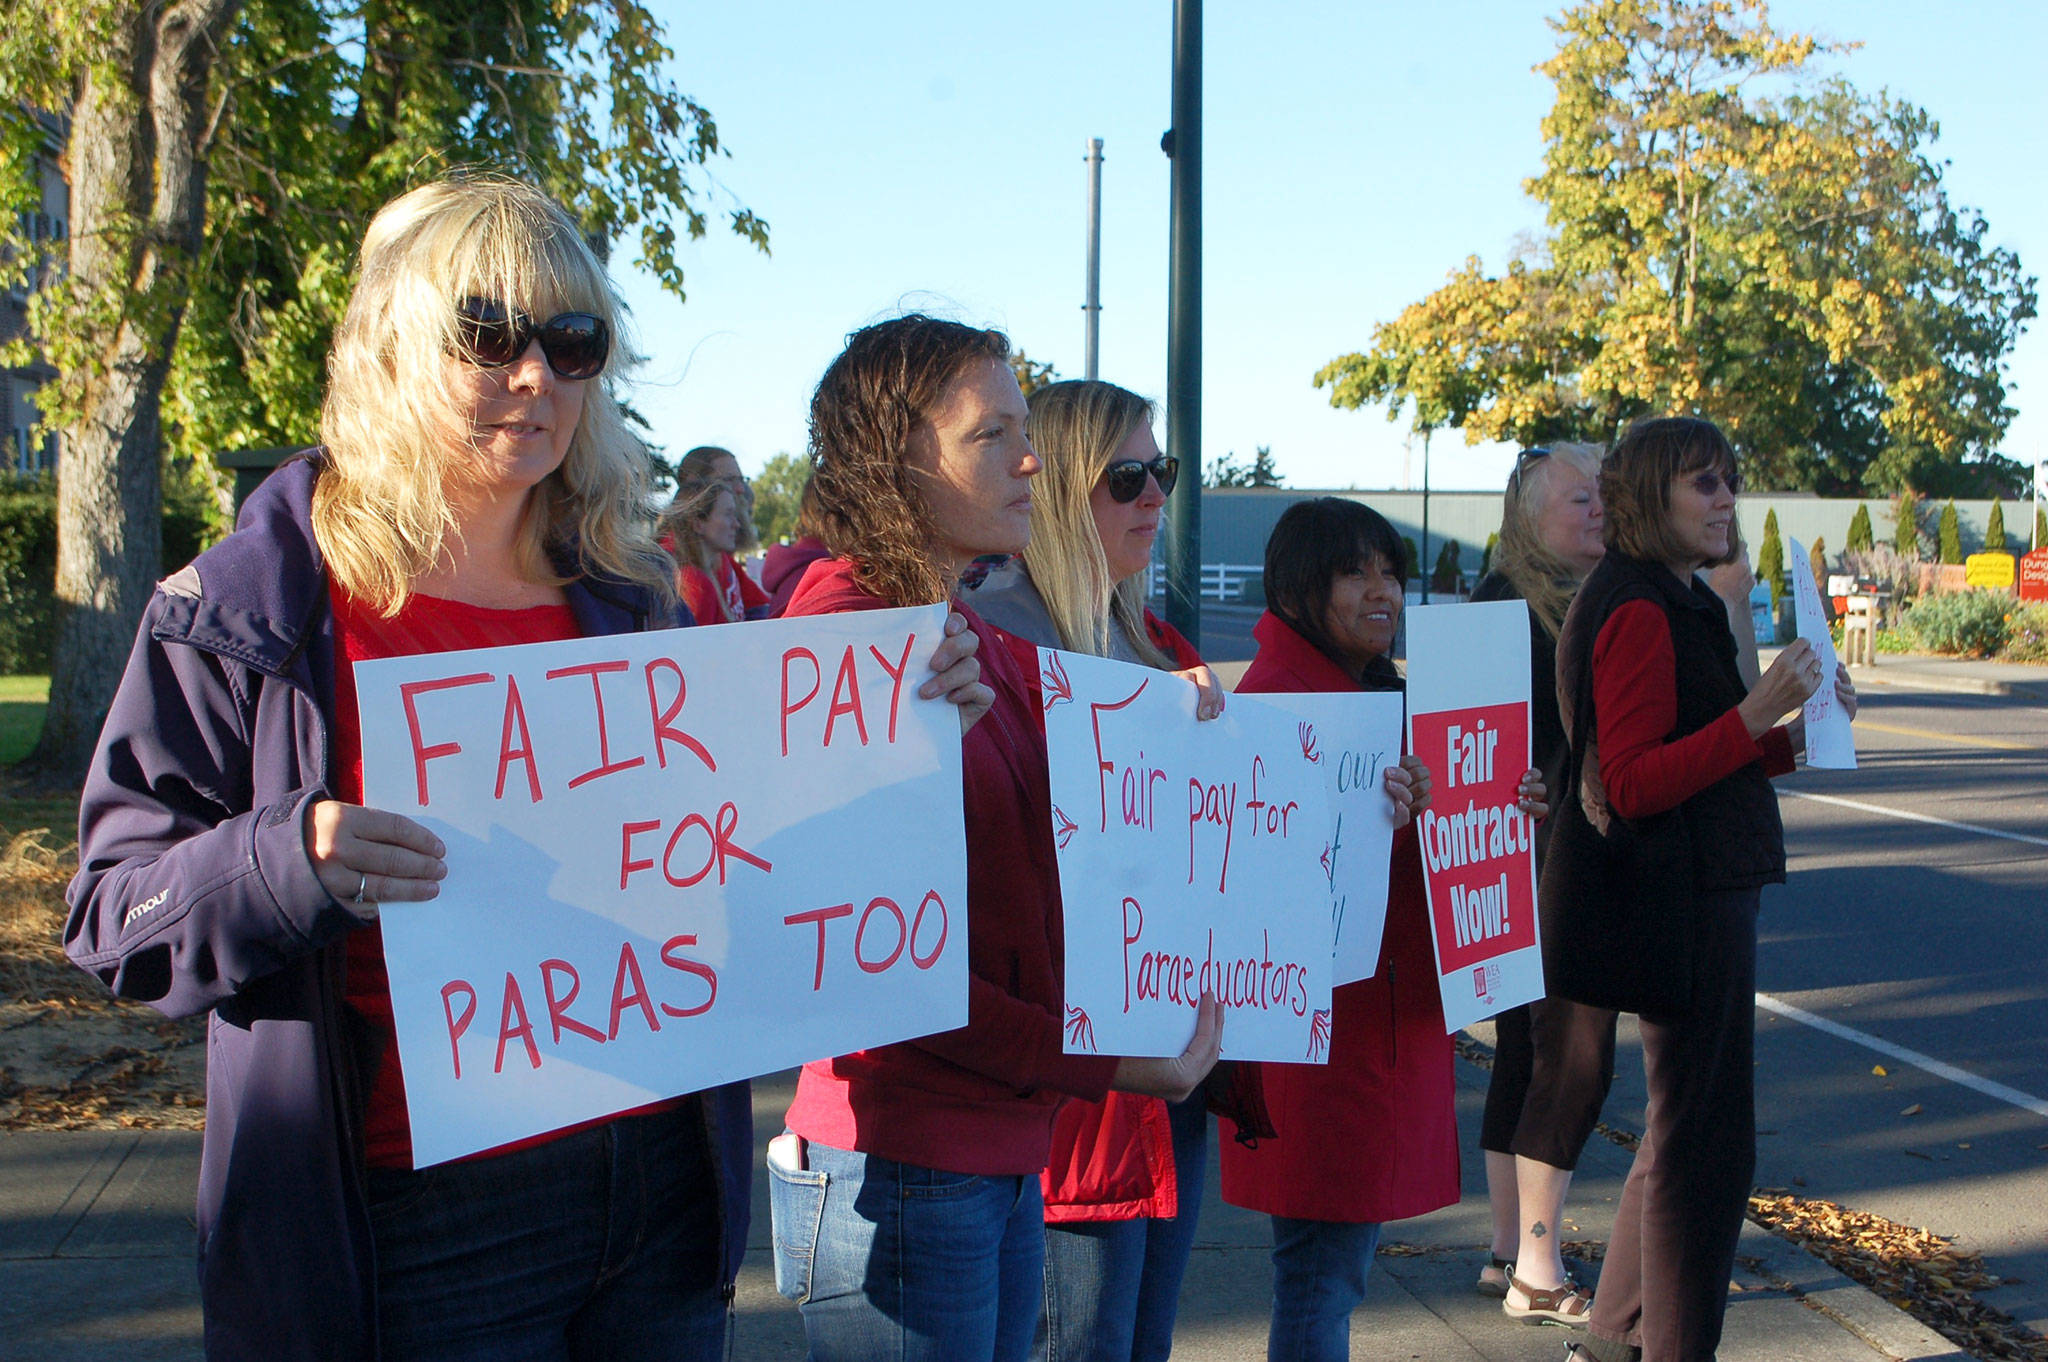 Paraeducators from Helen Haller Elementary School, from left, Veronica Catelli, Stephanie Dormer, Sarah Sullivan and Monica Gonzalez gather along the corner of N. Sequim Avenue and West Fir Street with other paraeducators to lobby for equitable salaries on Sept. 17. Sequim Gazette photo by Erin Hawkins                                Paraeducators from Helen Haller Elementary School, from left, Veronica Catelli, Stephanie Dormer, Sarah Sullivan and Monica Gonzalez gather along the corner of N. Sequim Avenue and West Fir Street with other paraeducators to lobby for equitable salaries on Sept. 17. Sequim Gazette photo by Erin Hawkins